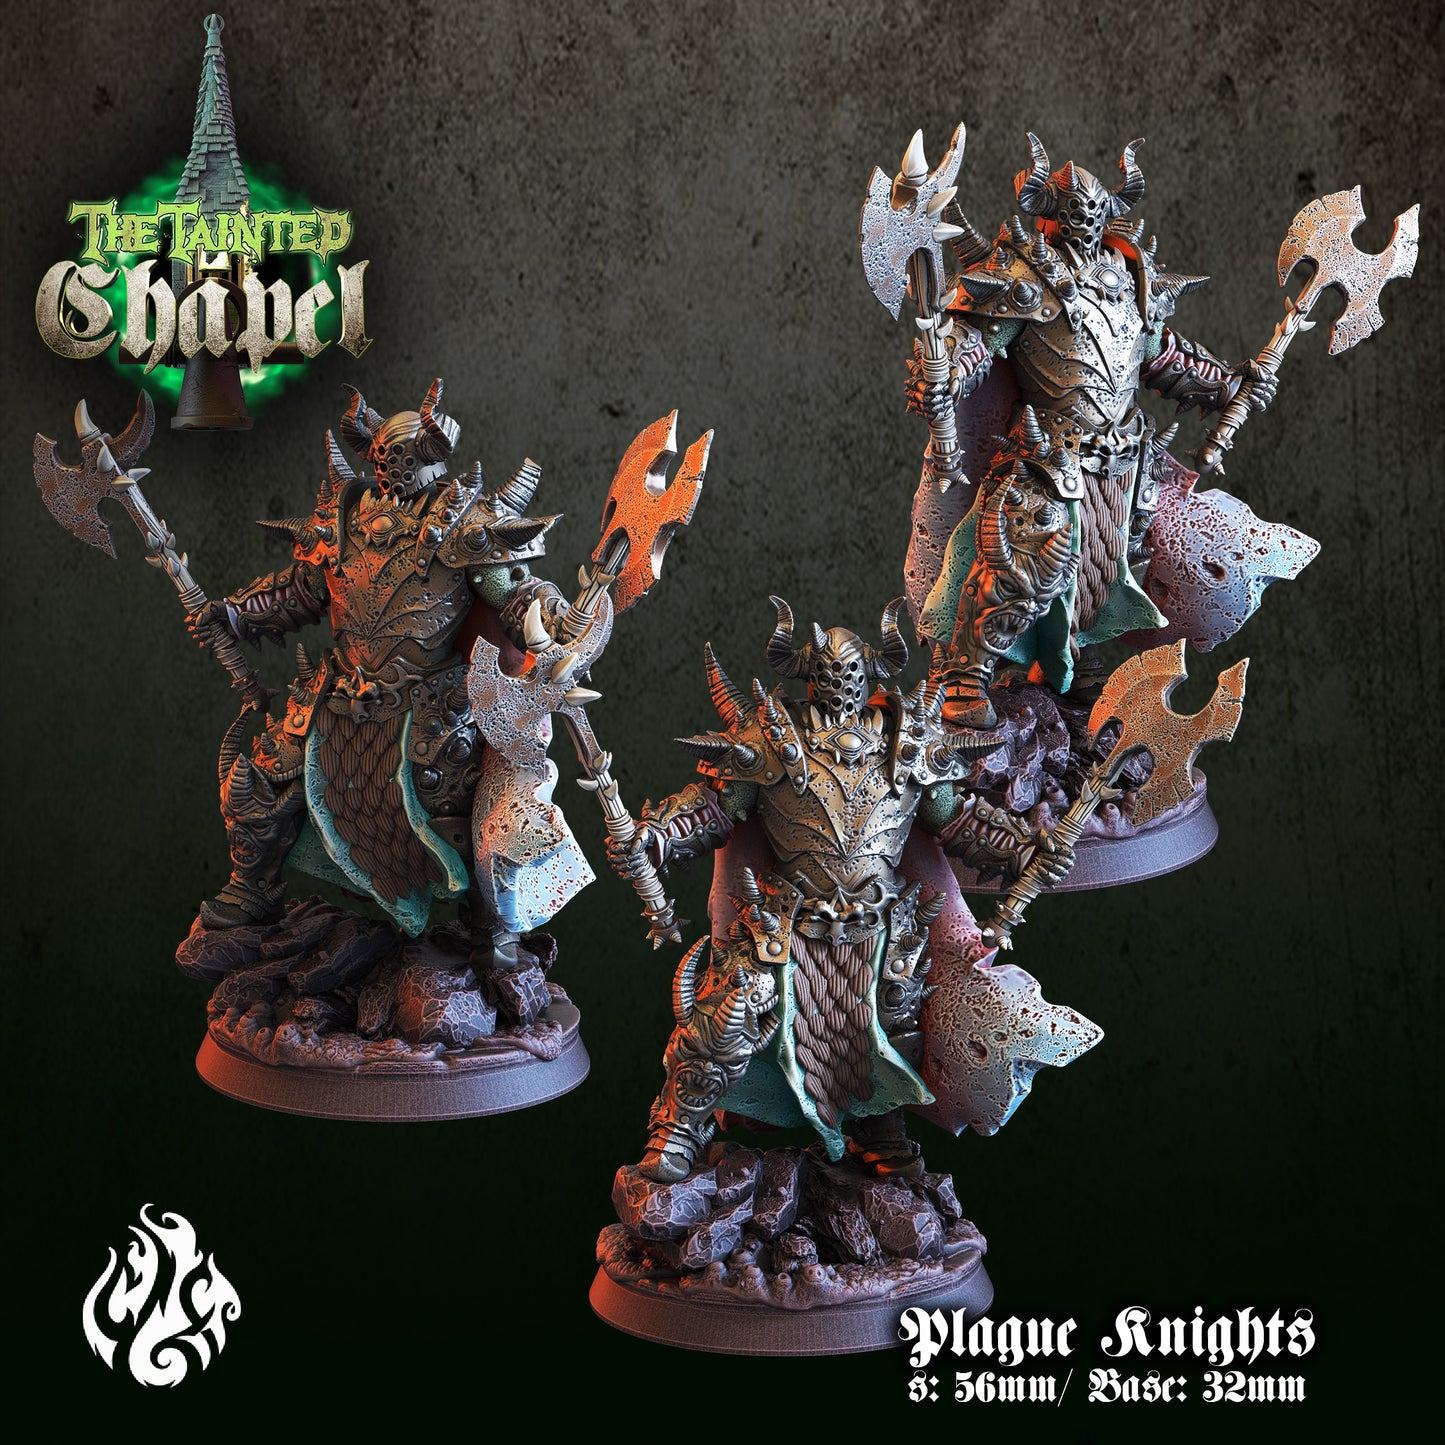 The Plague Knights - The Tainted Chapel Series from Crippled God Foundry - Table-top gaming mini and collectable for painting.